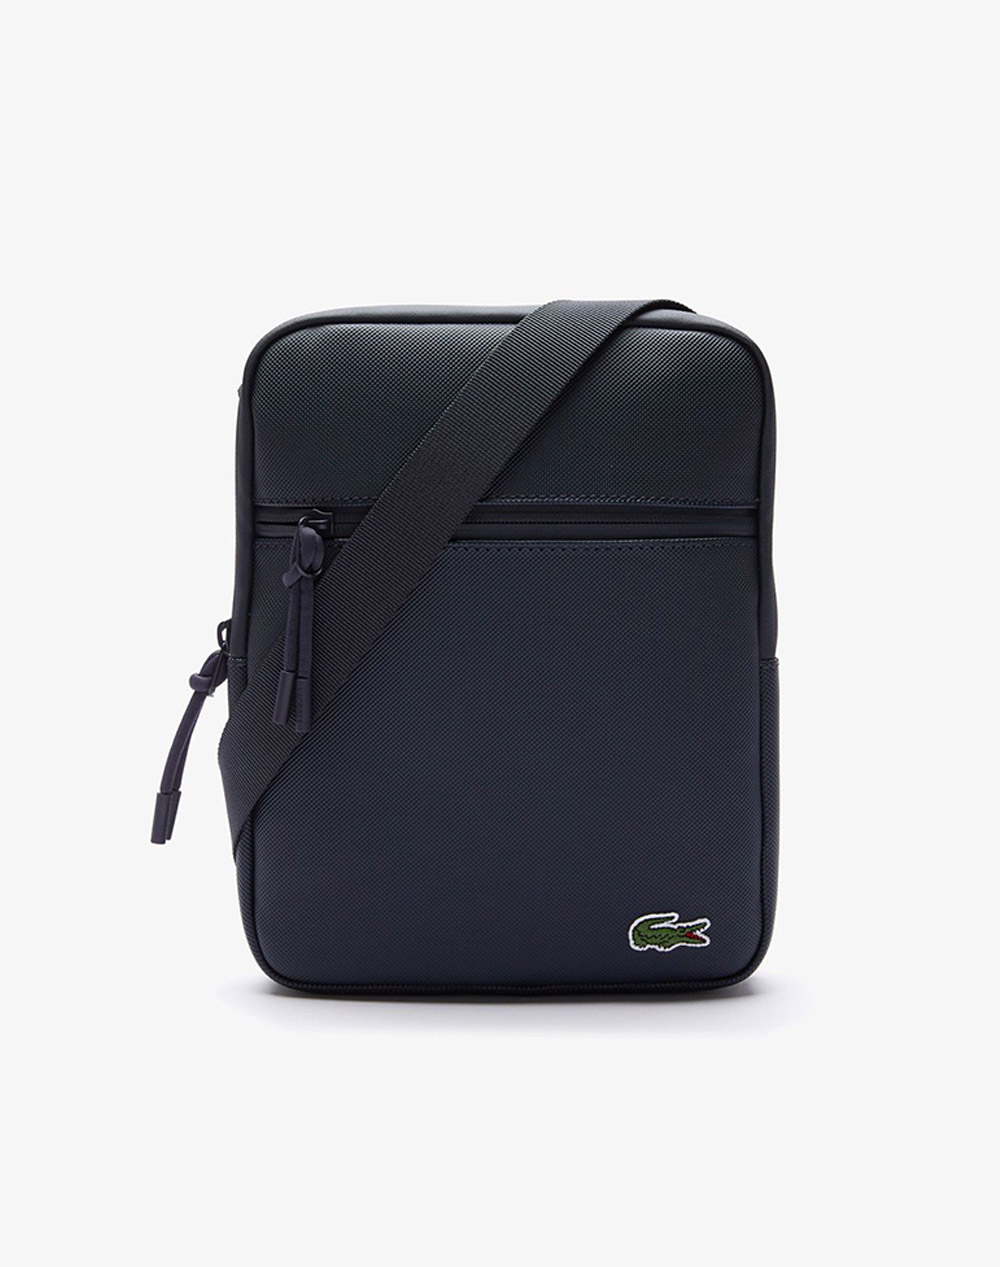 Lacoste Black Embroidered Crossbody Bag Lacoste